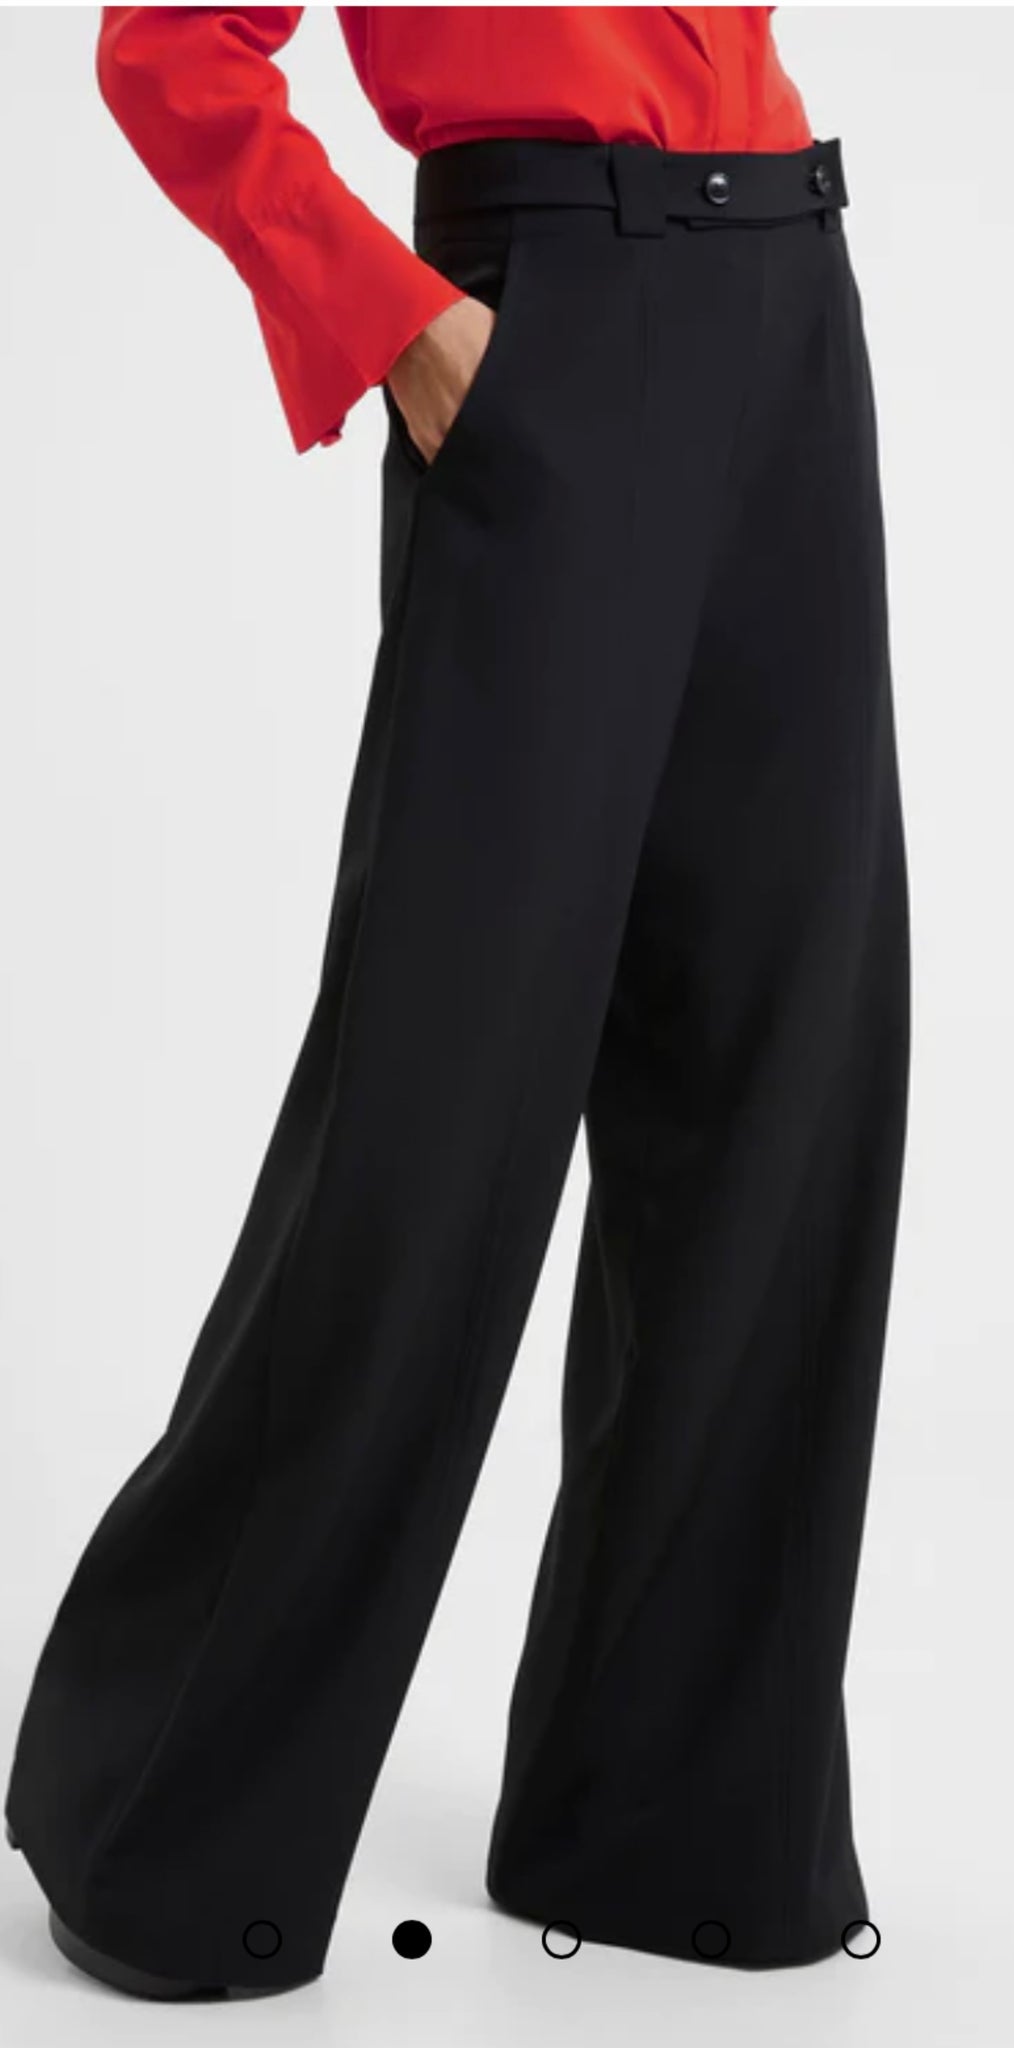 FRENCH CONNECTION - Black Full Length Crepe Trousers